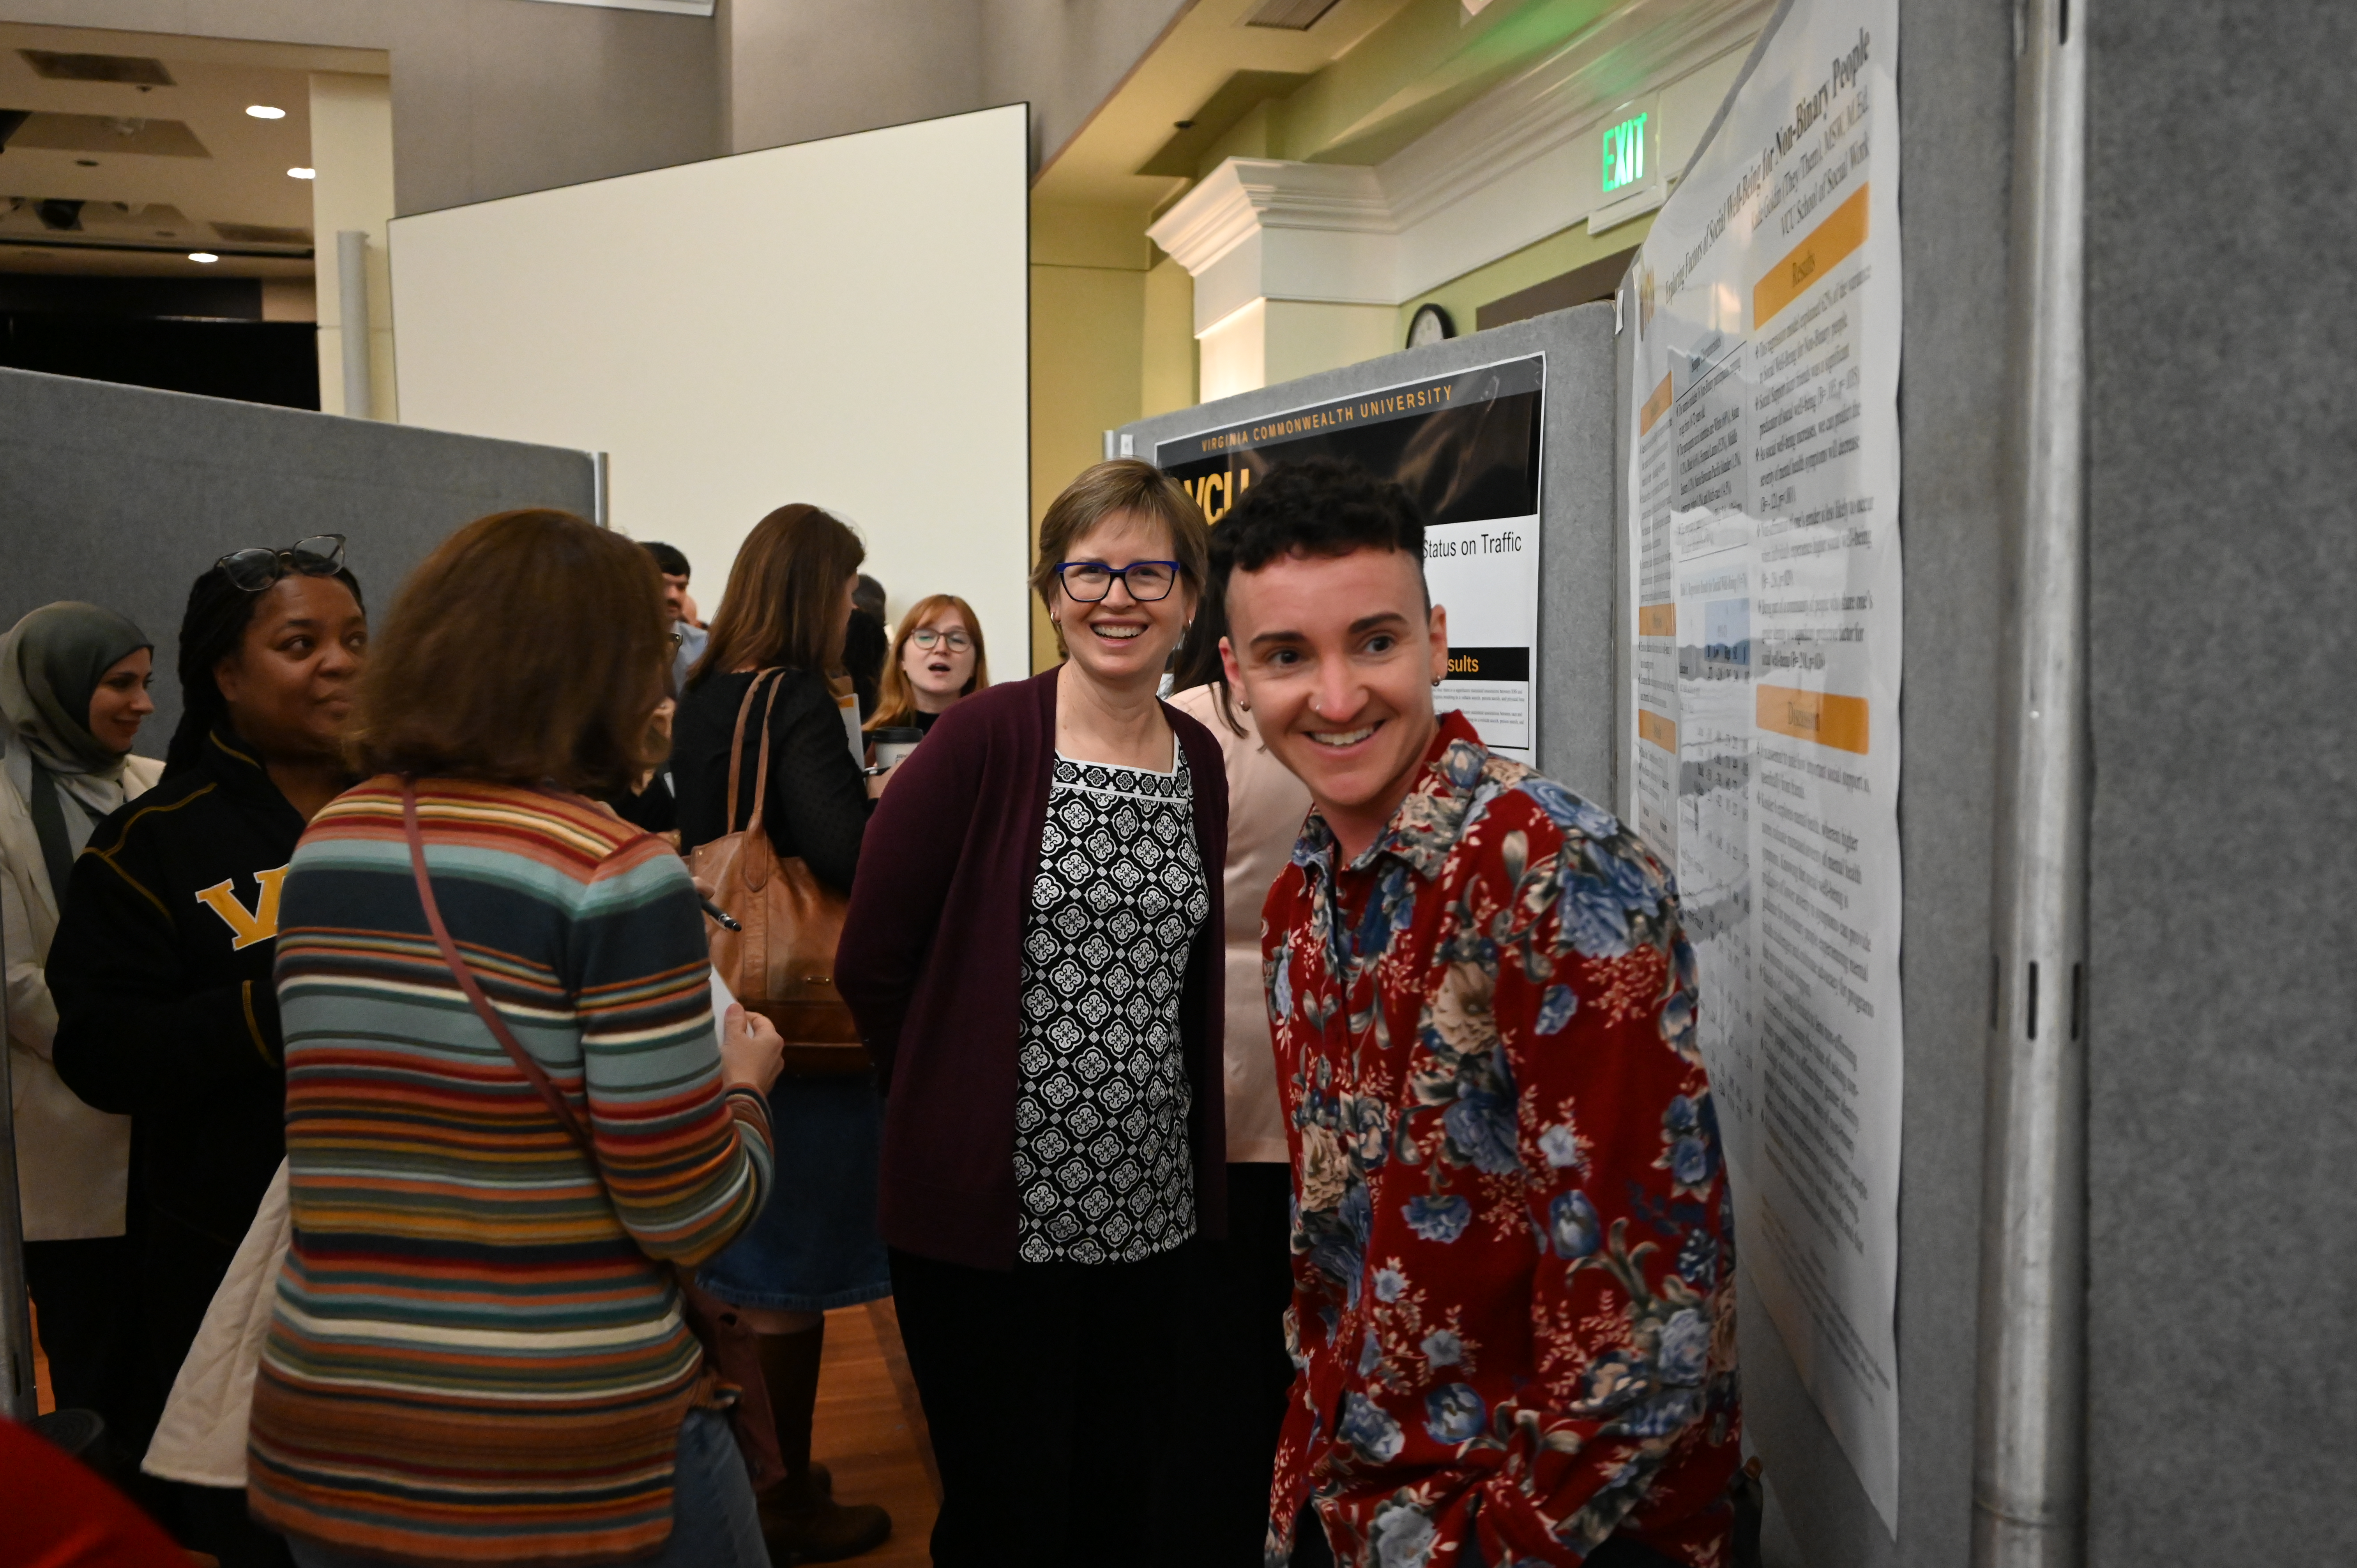 A student and a judge at the research symposium.